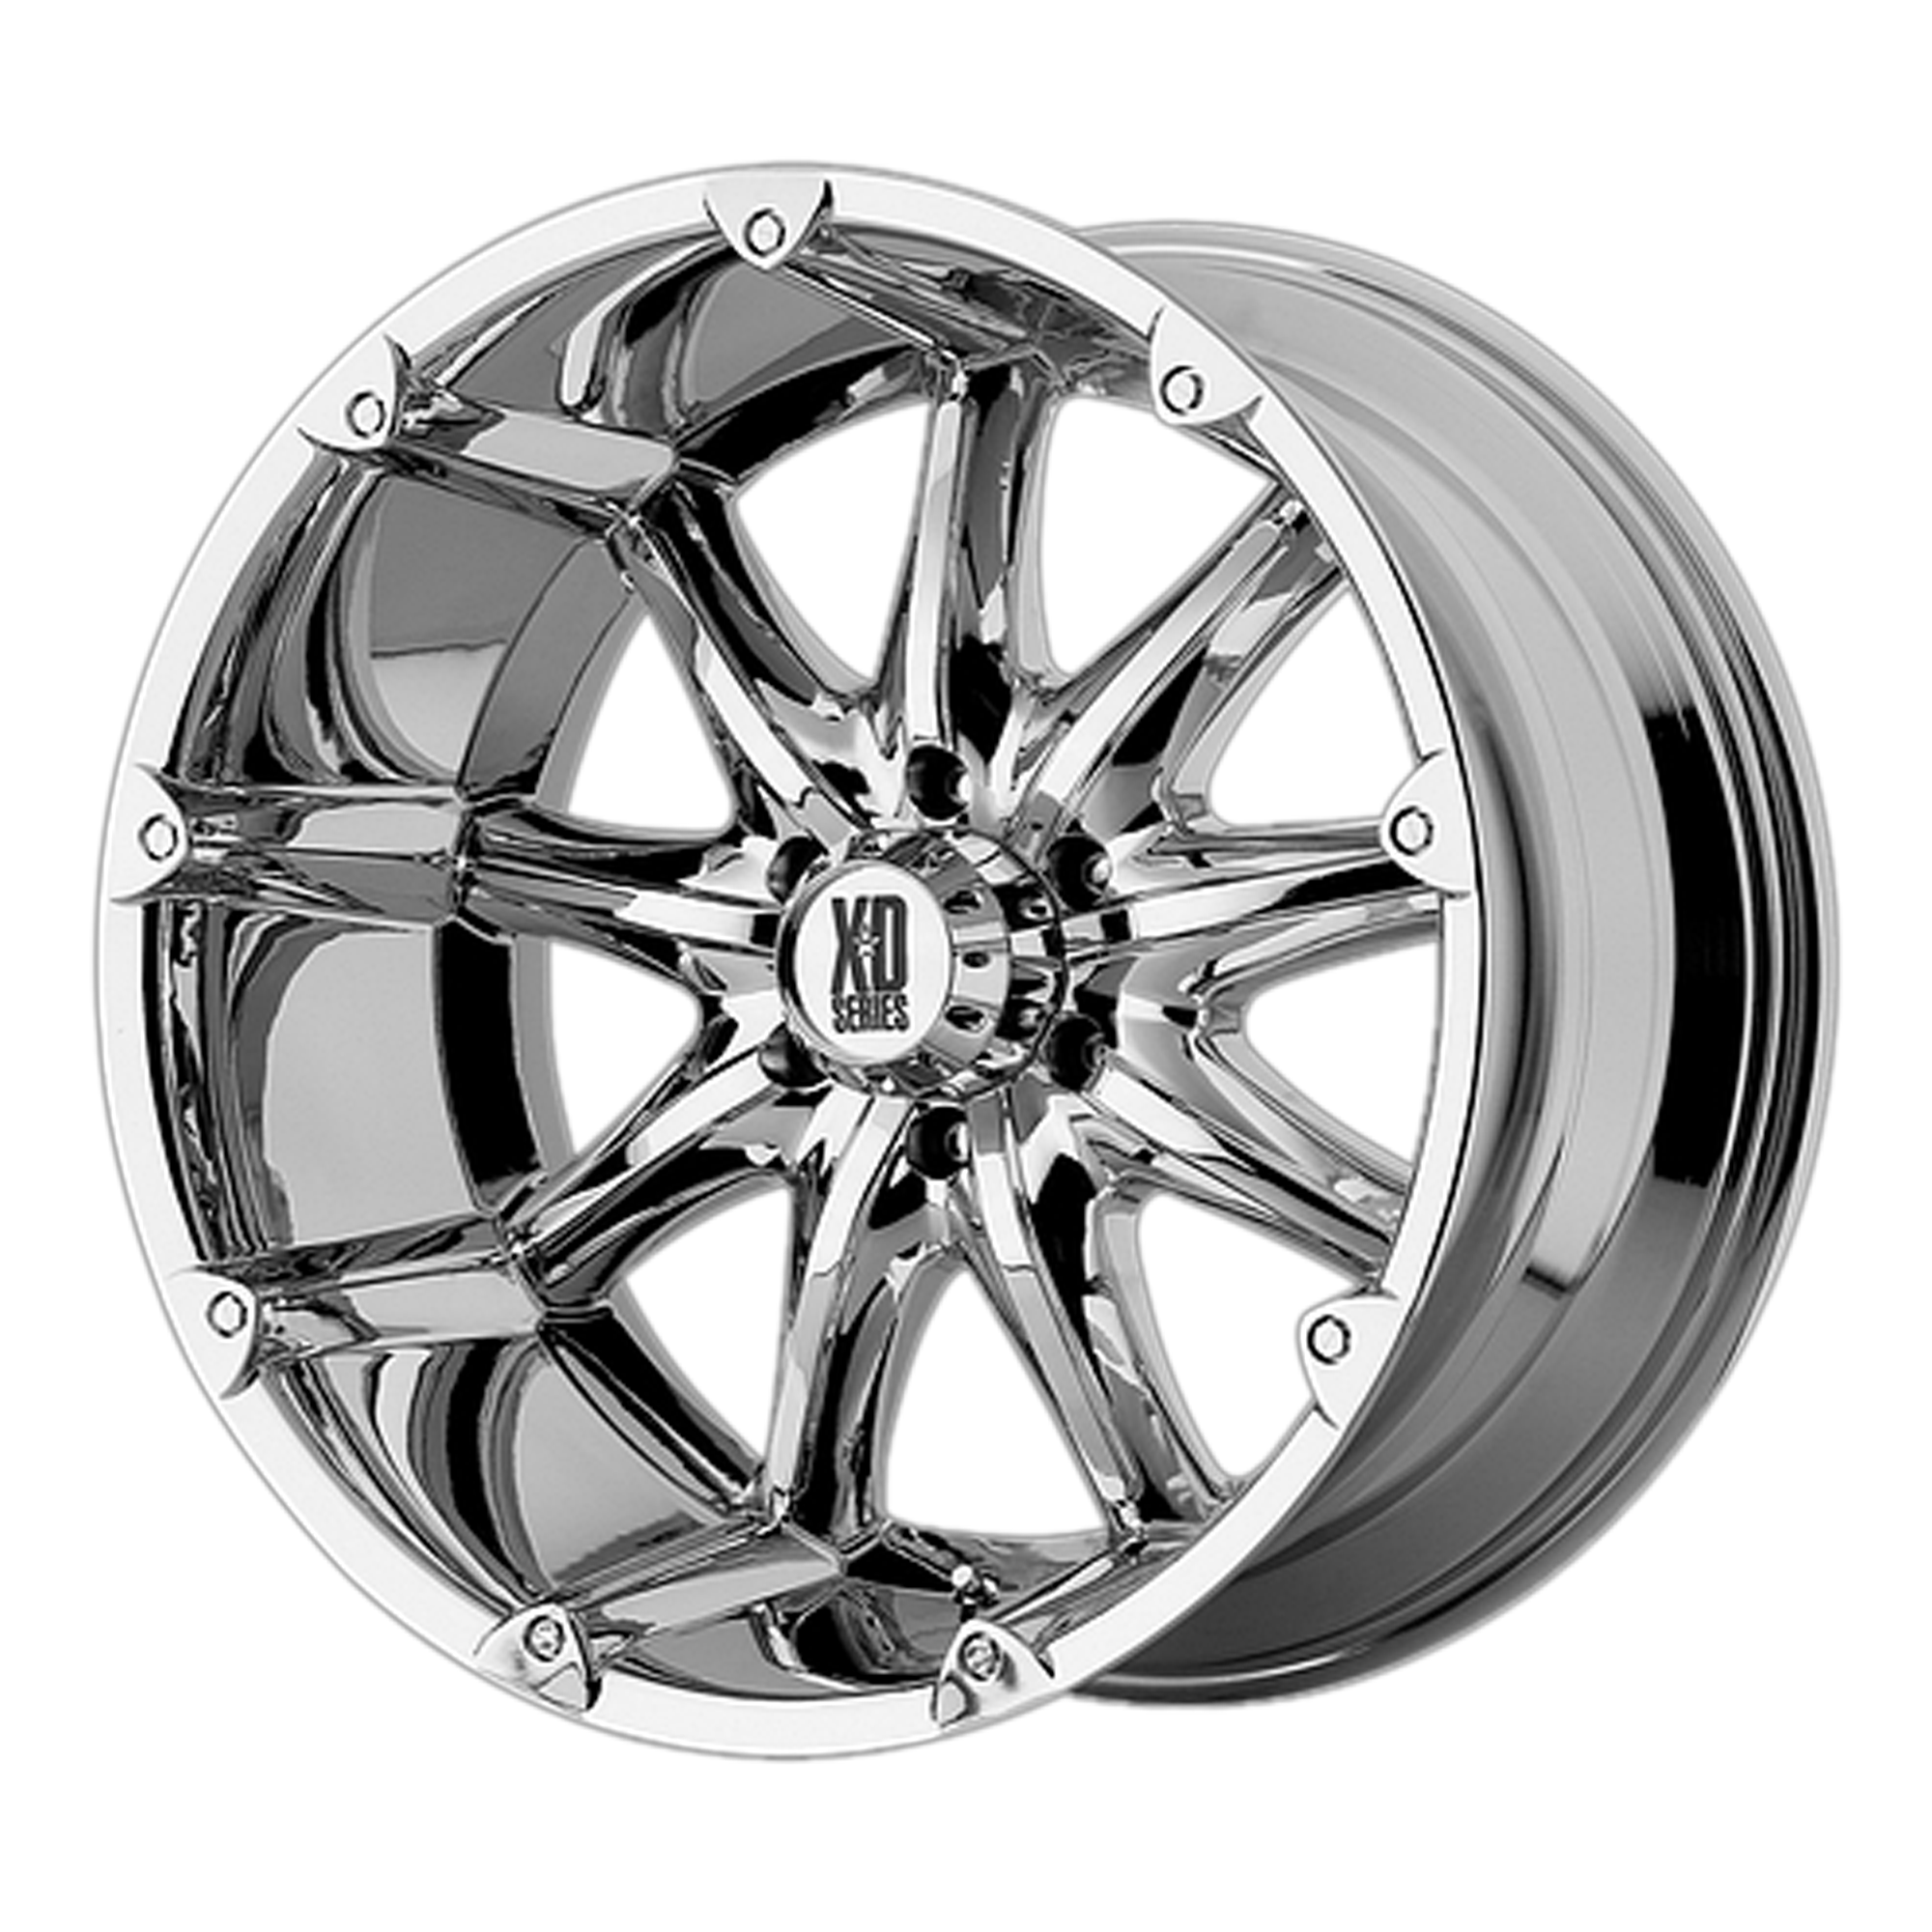 BADLANDS 20x9 8x170.00 CHROME (18 mm) - Tires and Engine Performance